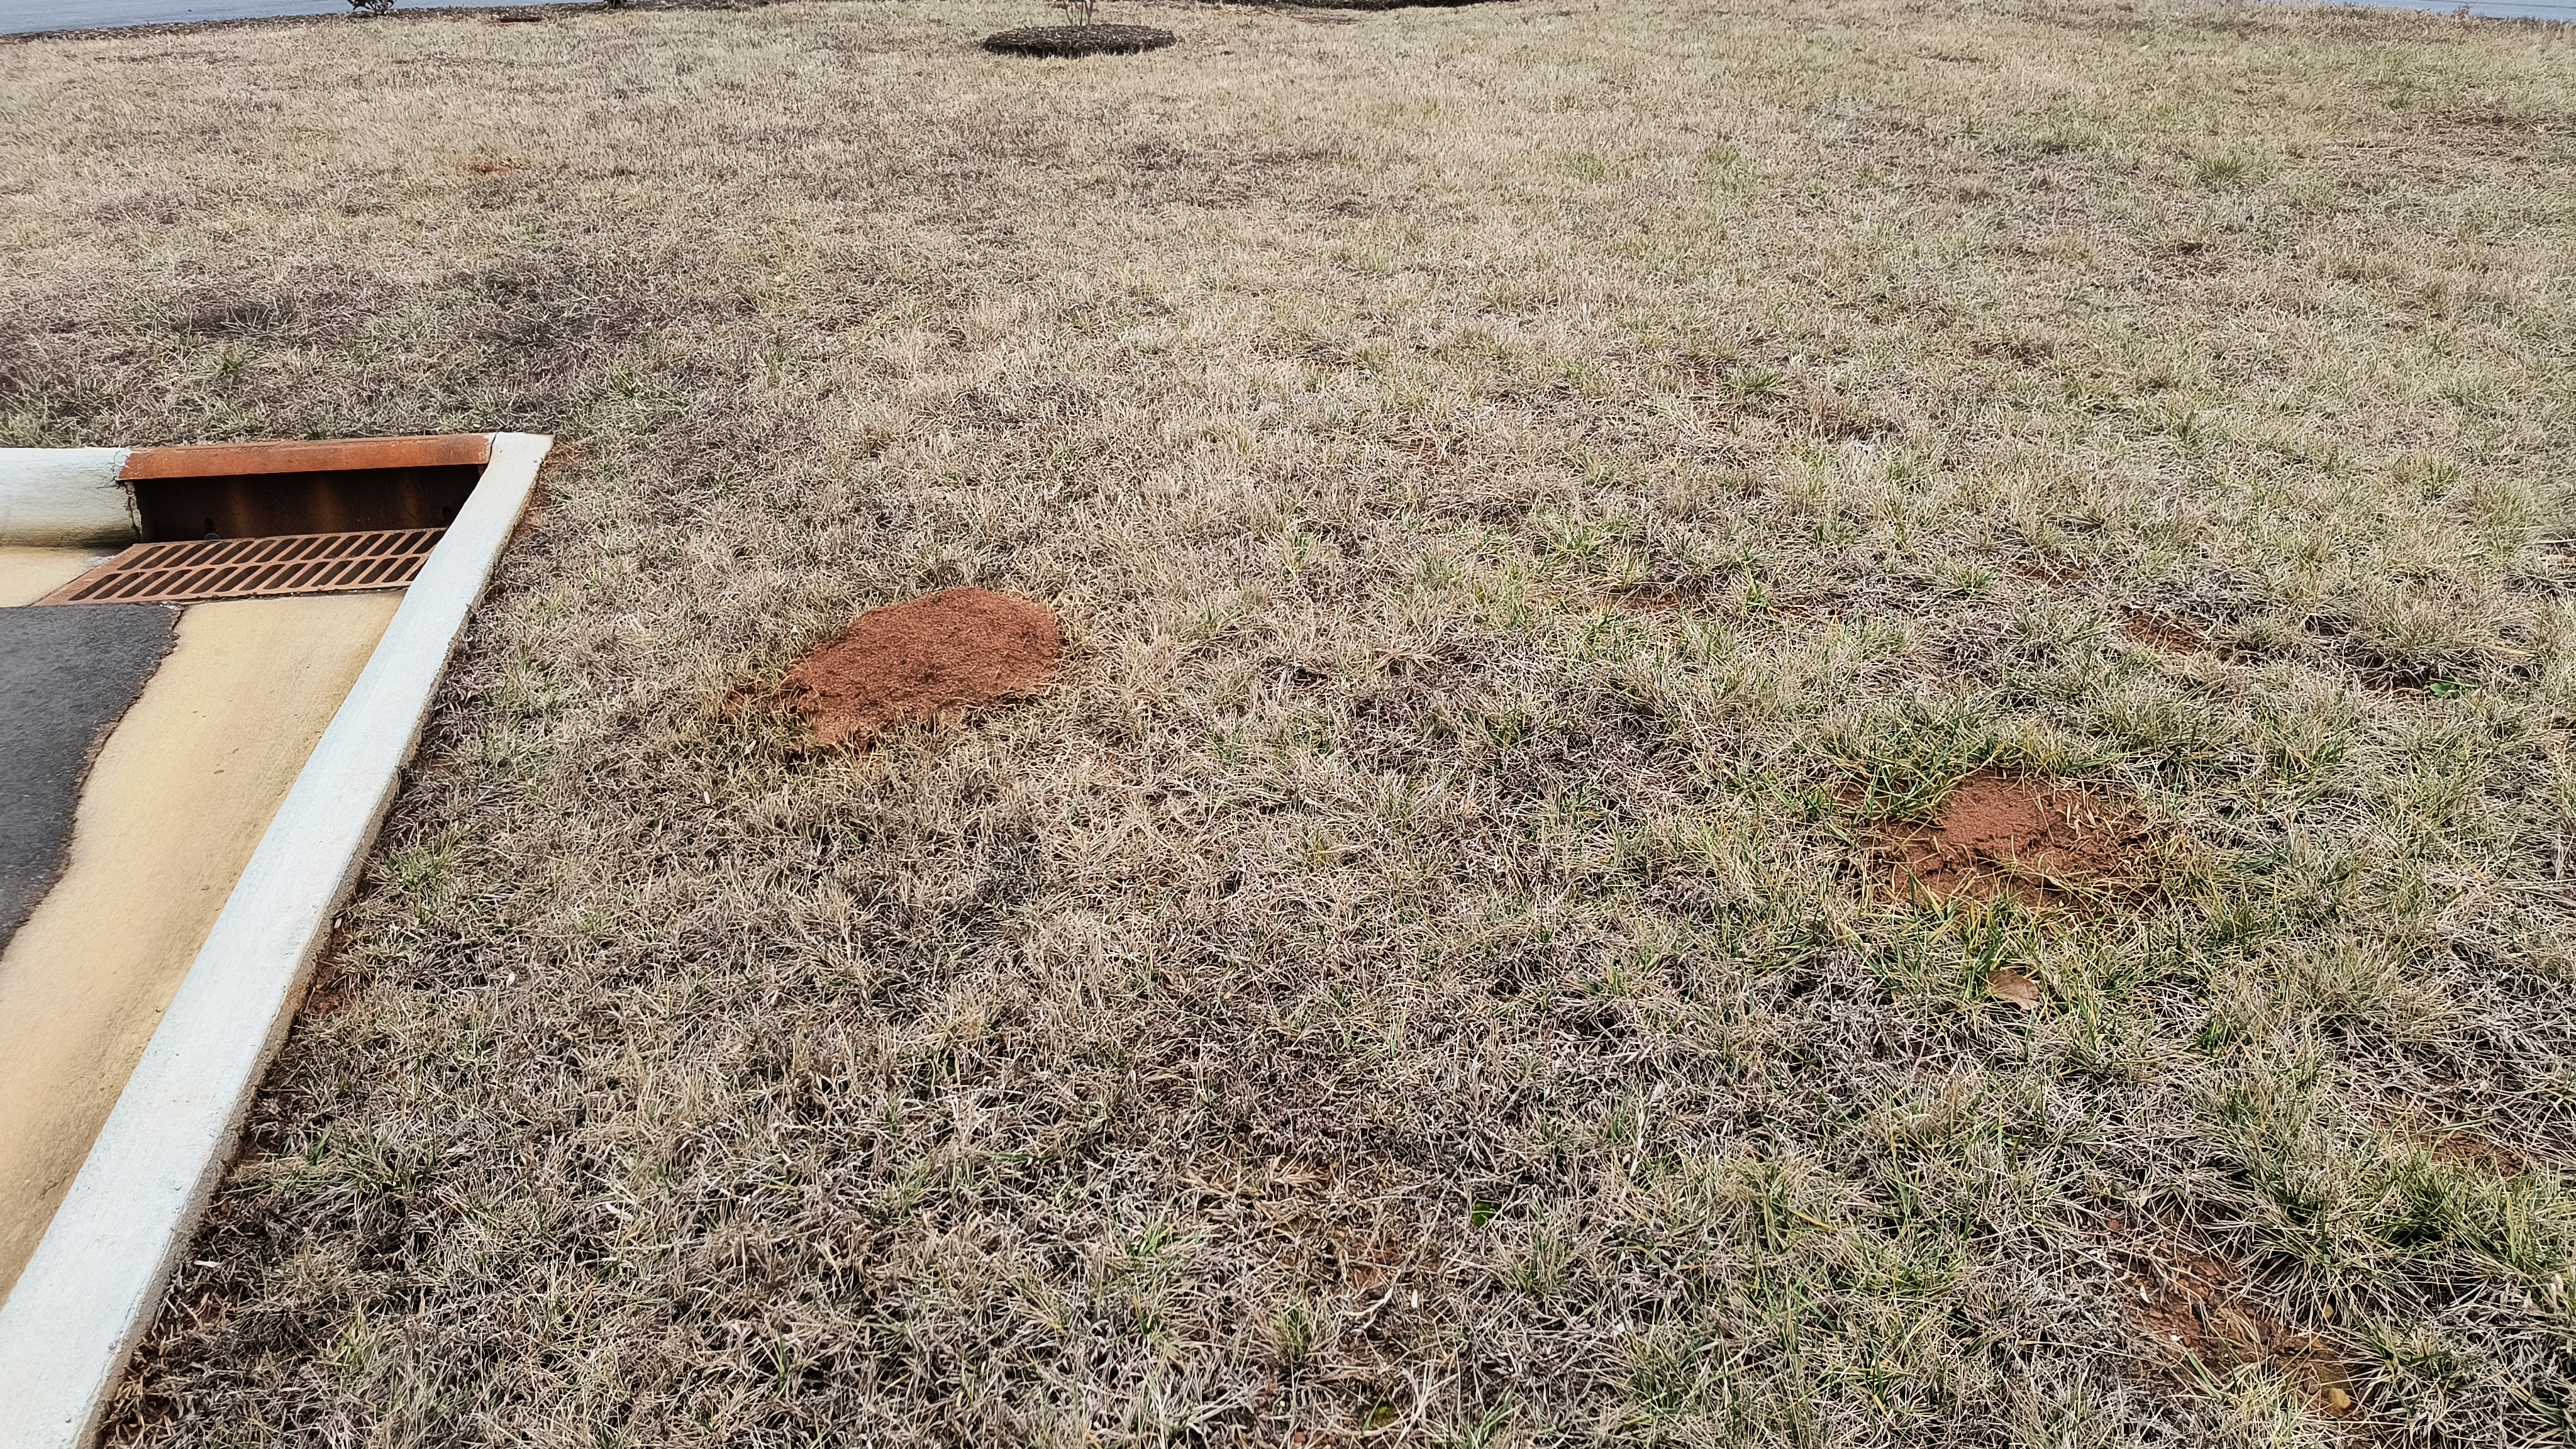 Fire ant mounds will be more common in Caldwell County in 2023. (Credit: Seth Nagy)